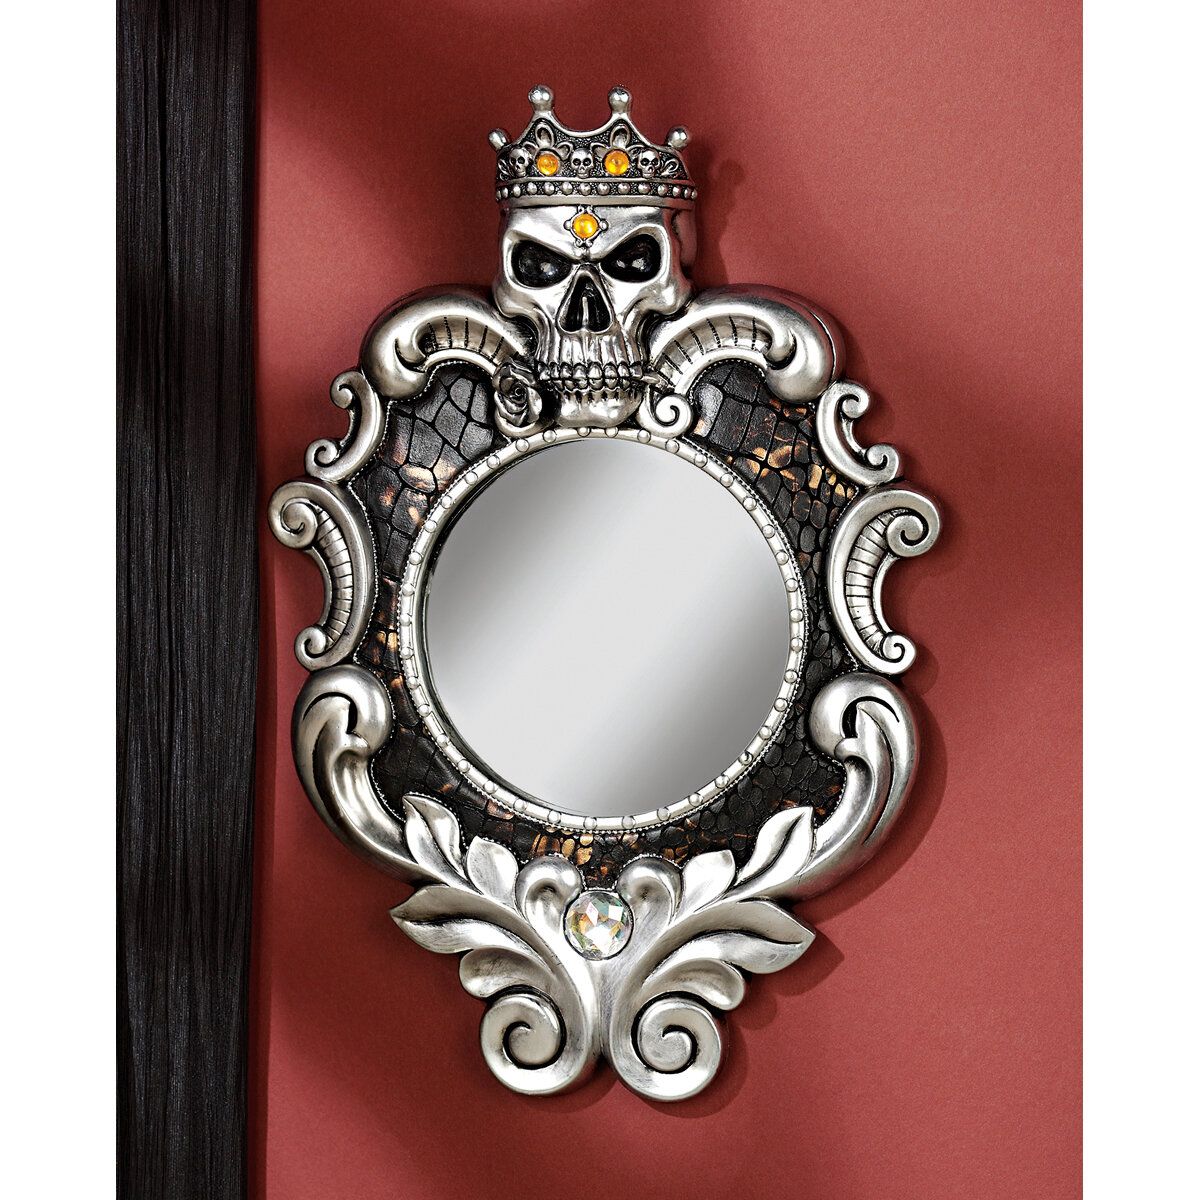 Design Toscano The Fairest One Of All Wall Mirror | Ebay With Regard To Karn Vertical Round Resin Wall Mirrors (View 4 of 15)